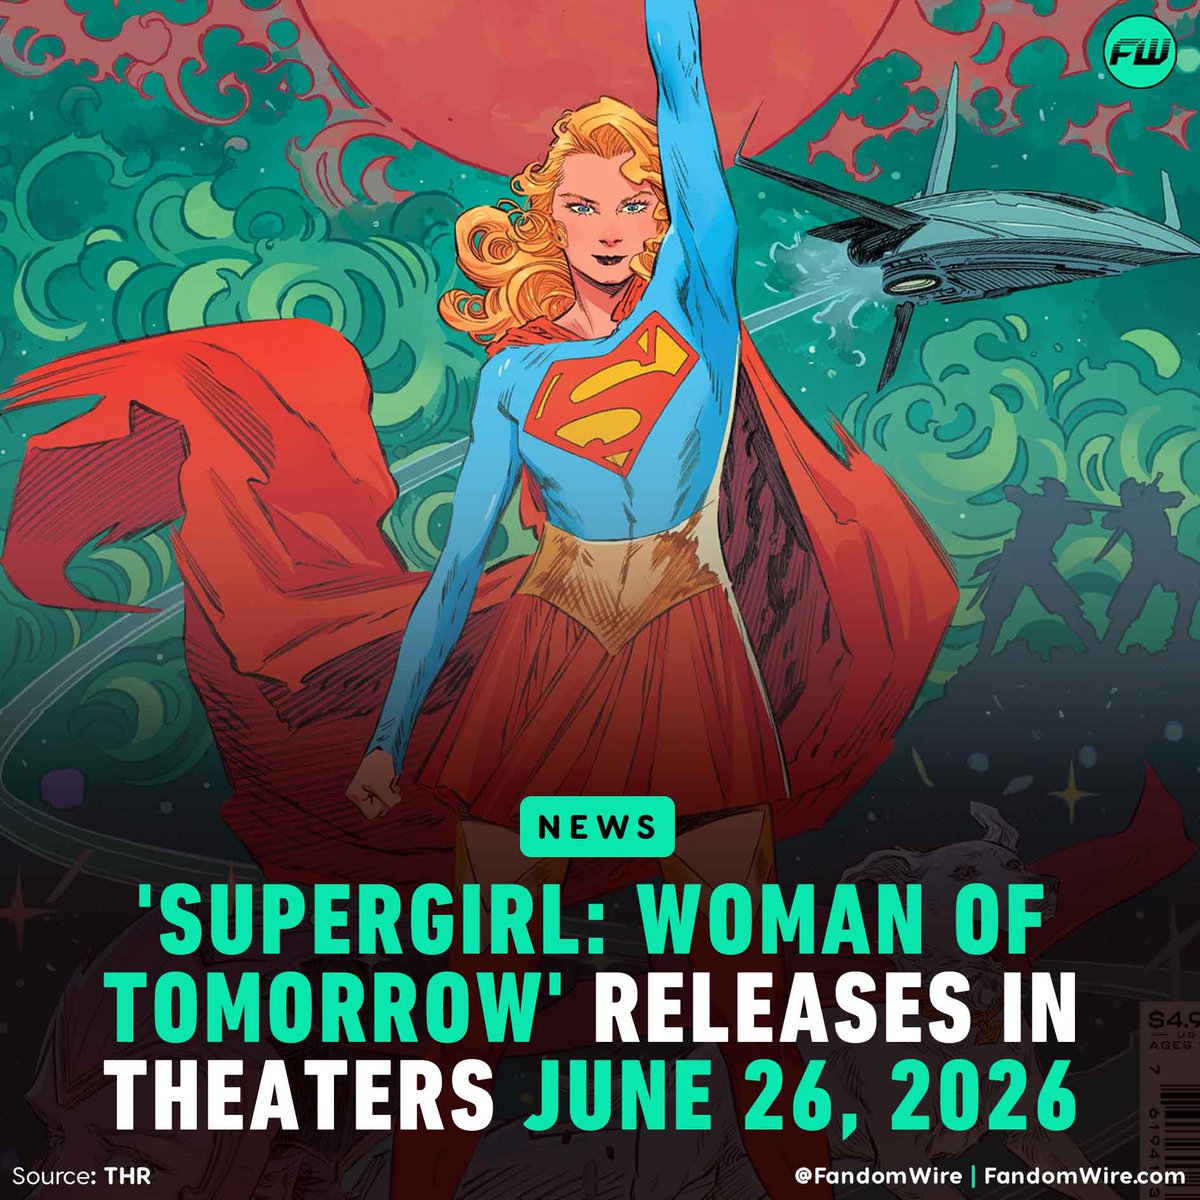 ‘Supergirl: Woman of Tomorrow’ releases in theaters June 26, 2026. The movie stars Milly Alcock as Supergirl.